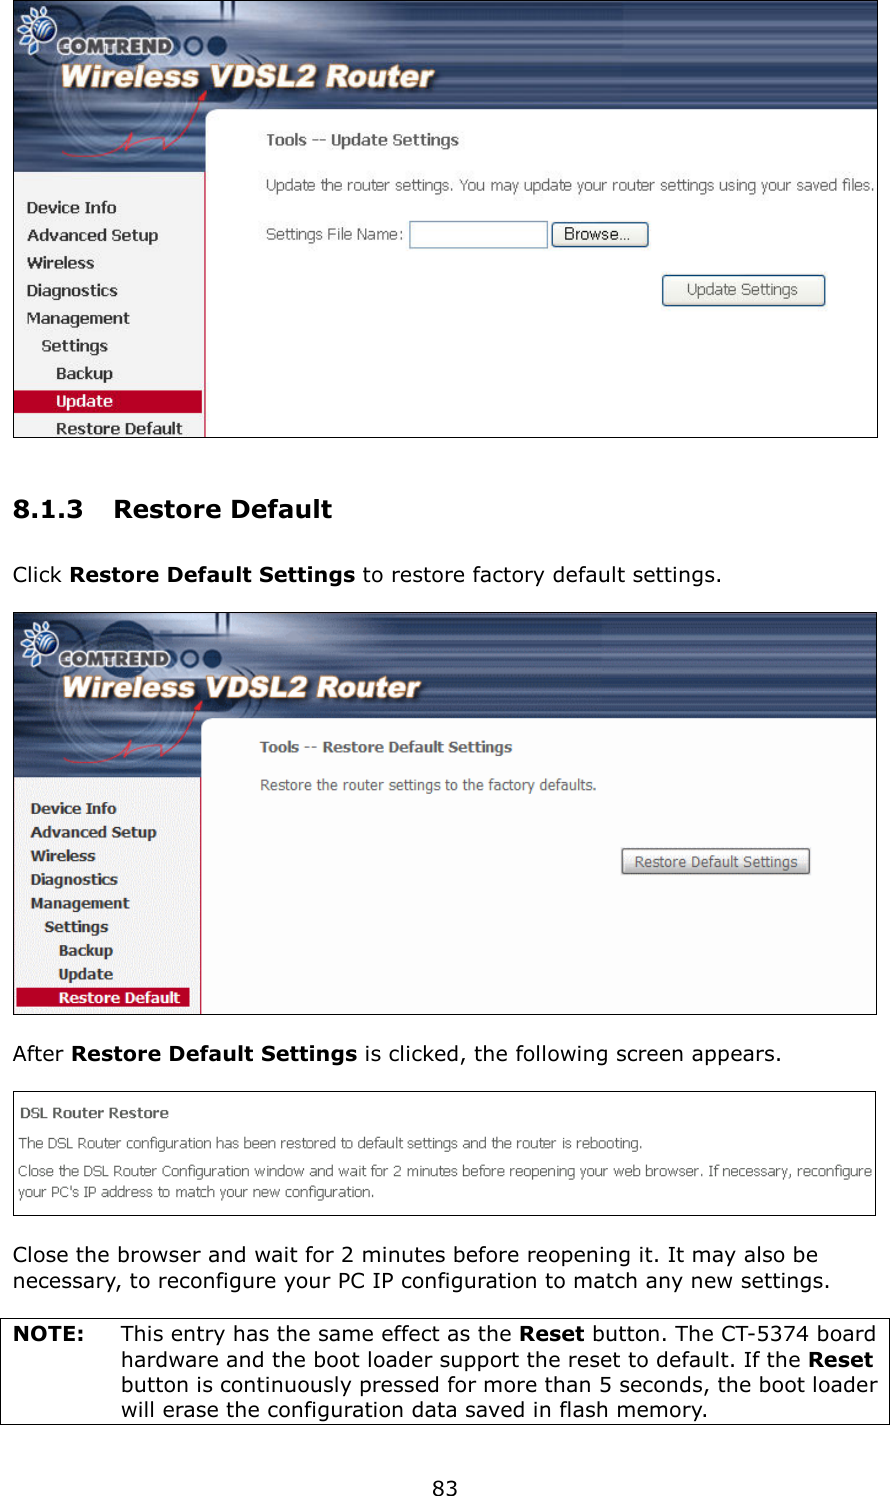   83  8.1.3  Restore Default Click Restore Default Settings to restore factory default settings.    After Restore Default Settings is clicked, the following screen appears.      Close the browser and wait for 2 minutes before reopening it. It may also be necessary, to reconfigure your PC IP configuration to match any new settings.  NOTE:    This entry has the same effect as the Reset button. The CT-5374 board hardware and the boot loader support the reset to default. If the Reset button is continuously pressed for more than 5 seconds, the boot loader will erase the configuration data saved in flash memory.  